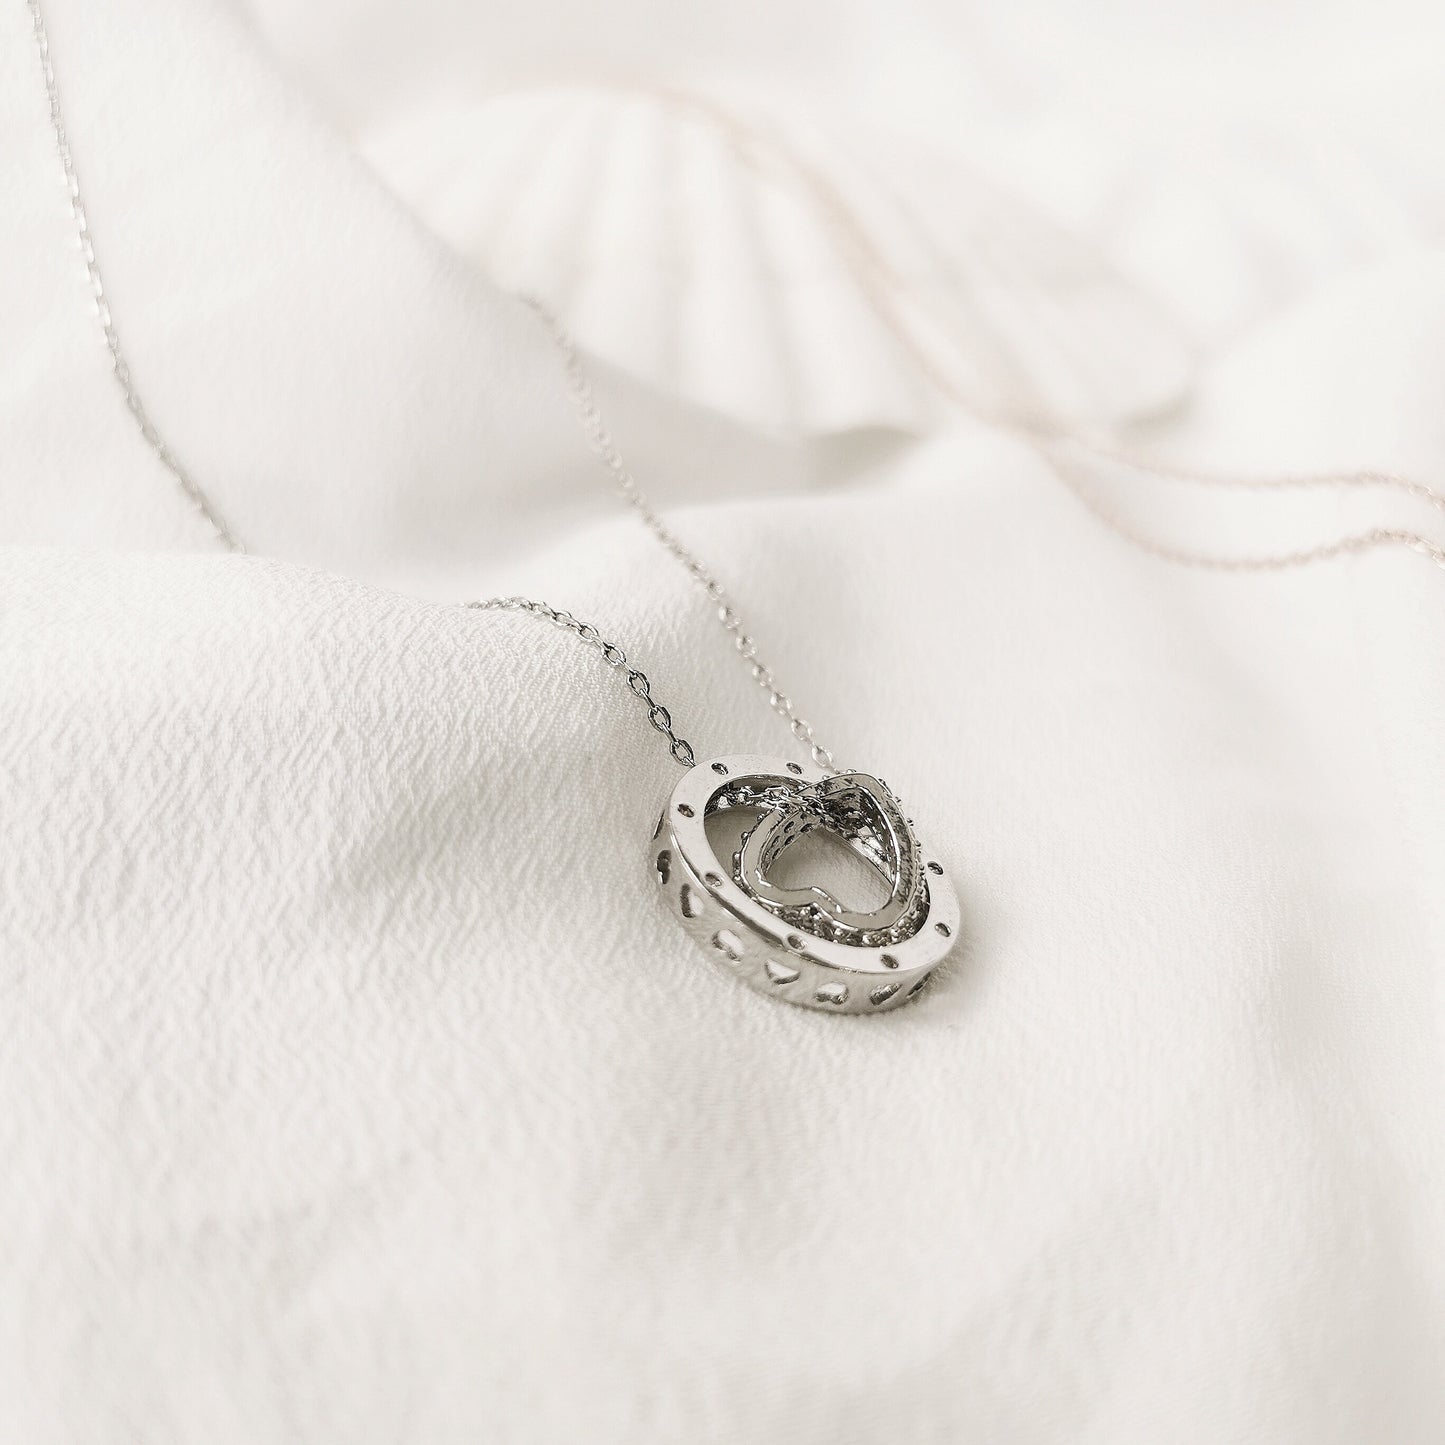 Auntie Gift Necklace / SYMBOLOGY Amazing Auntie CZ Circle Love Heart Necklace / Best Auntie Gift / Gift for Auntie